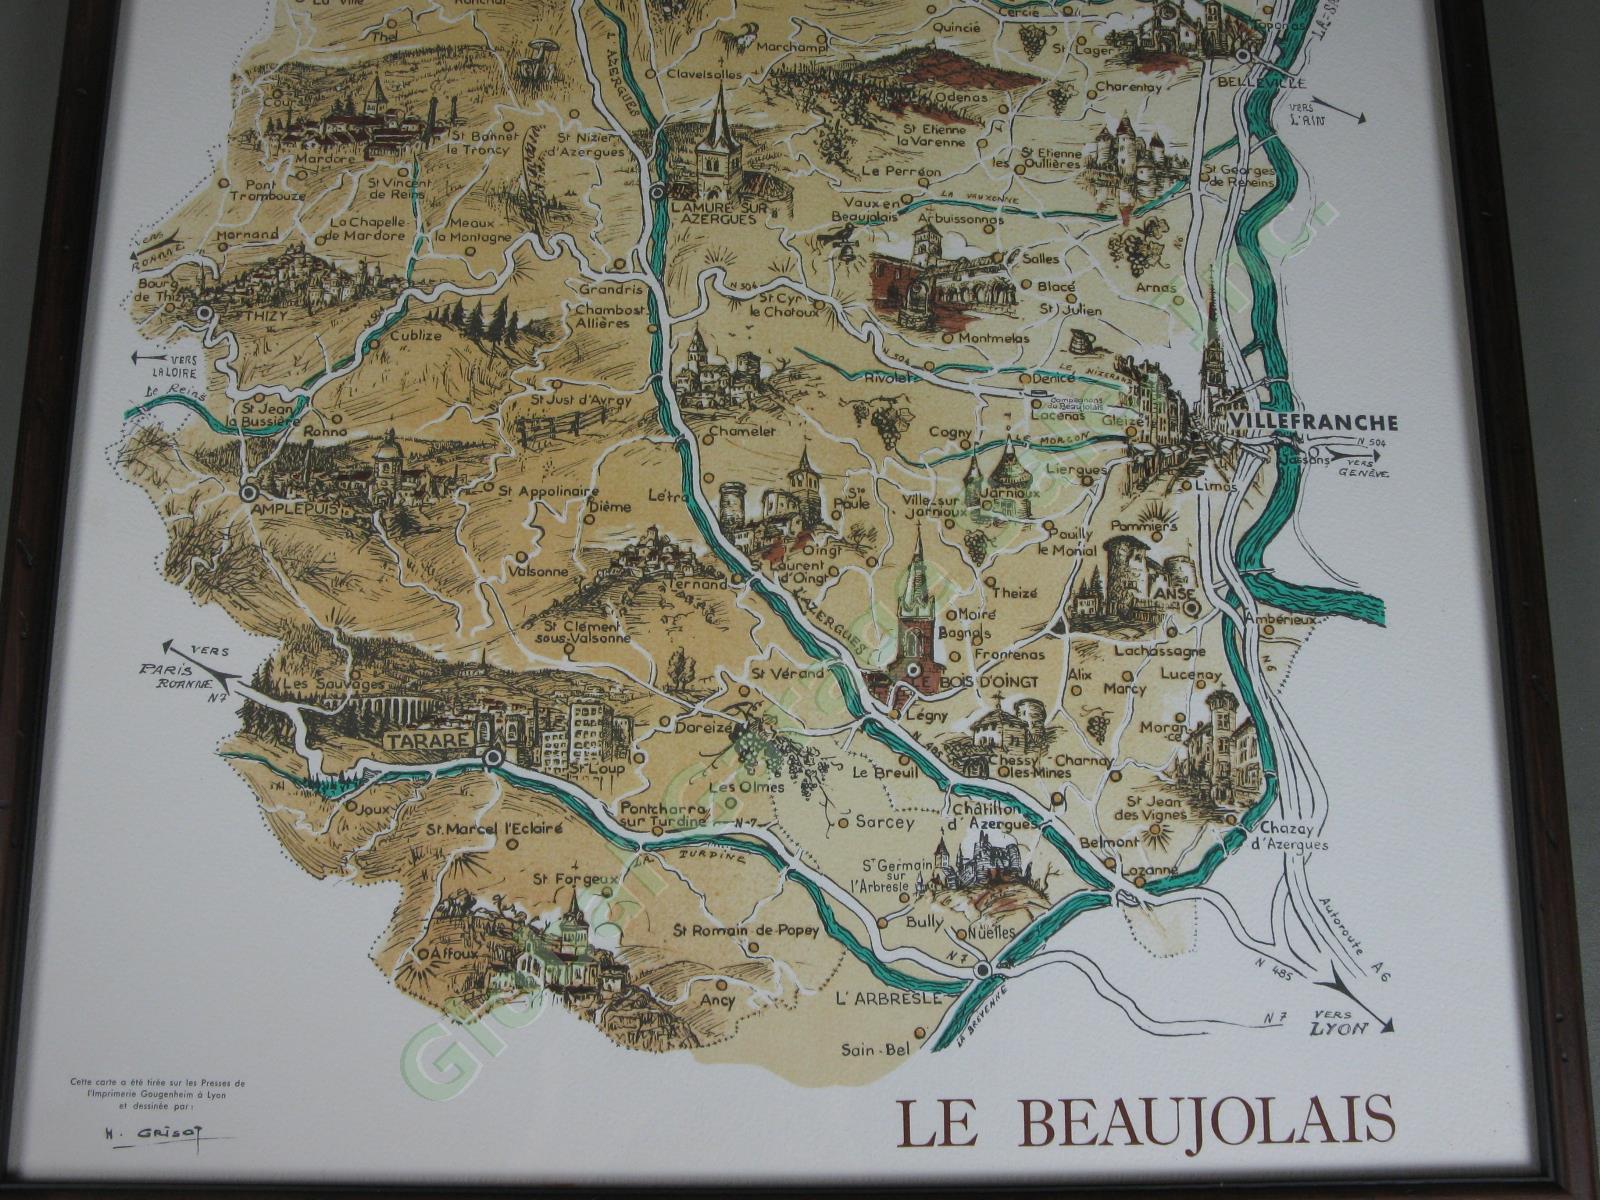 Vintage 1955 Henri Grisot Le Beaujolais French Pictorial Wine Region Map Framed 2